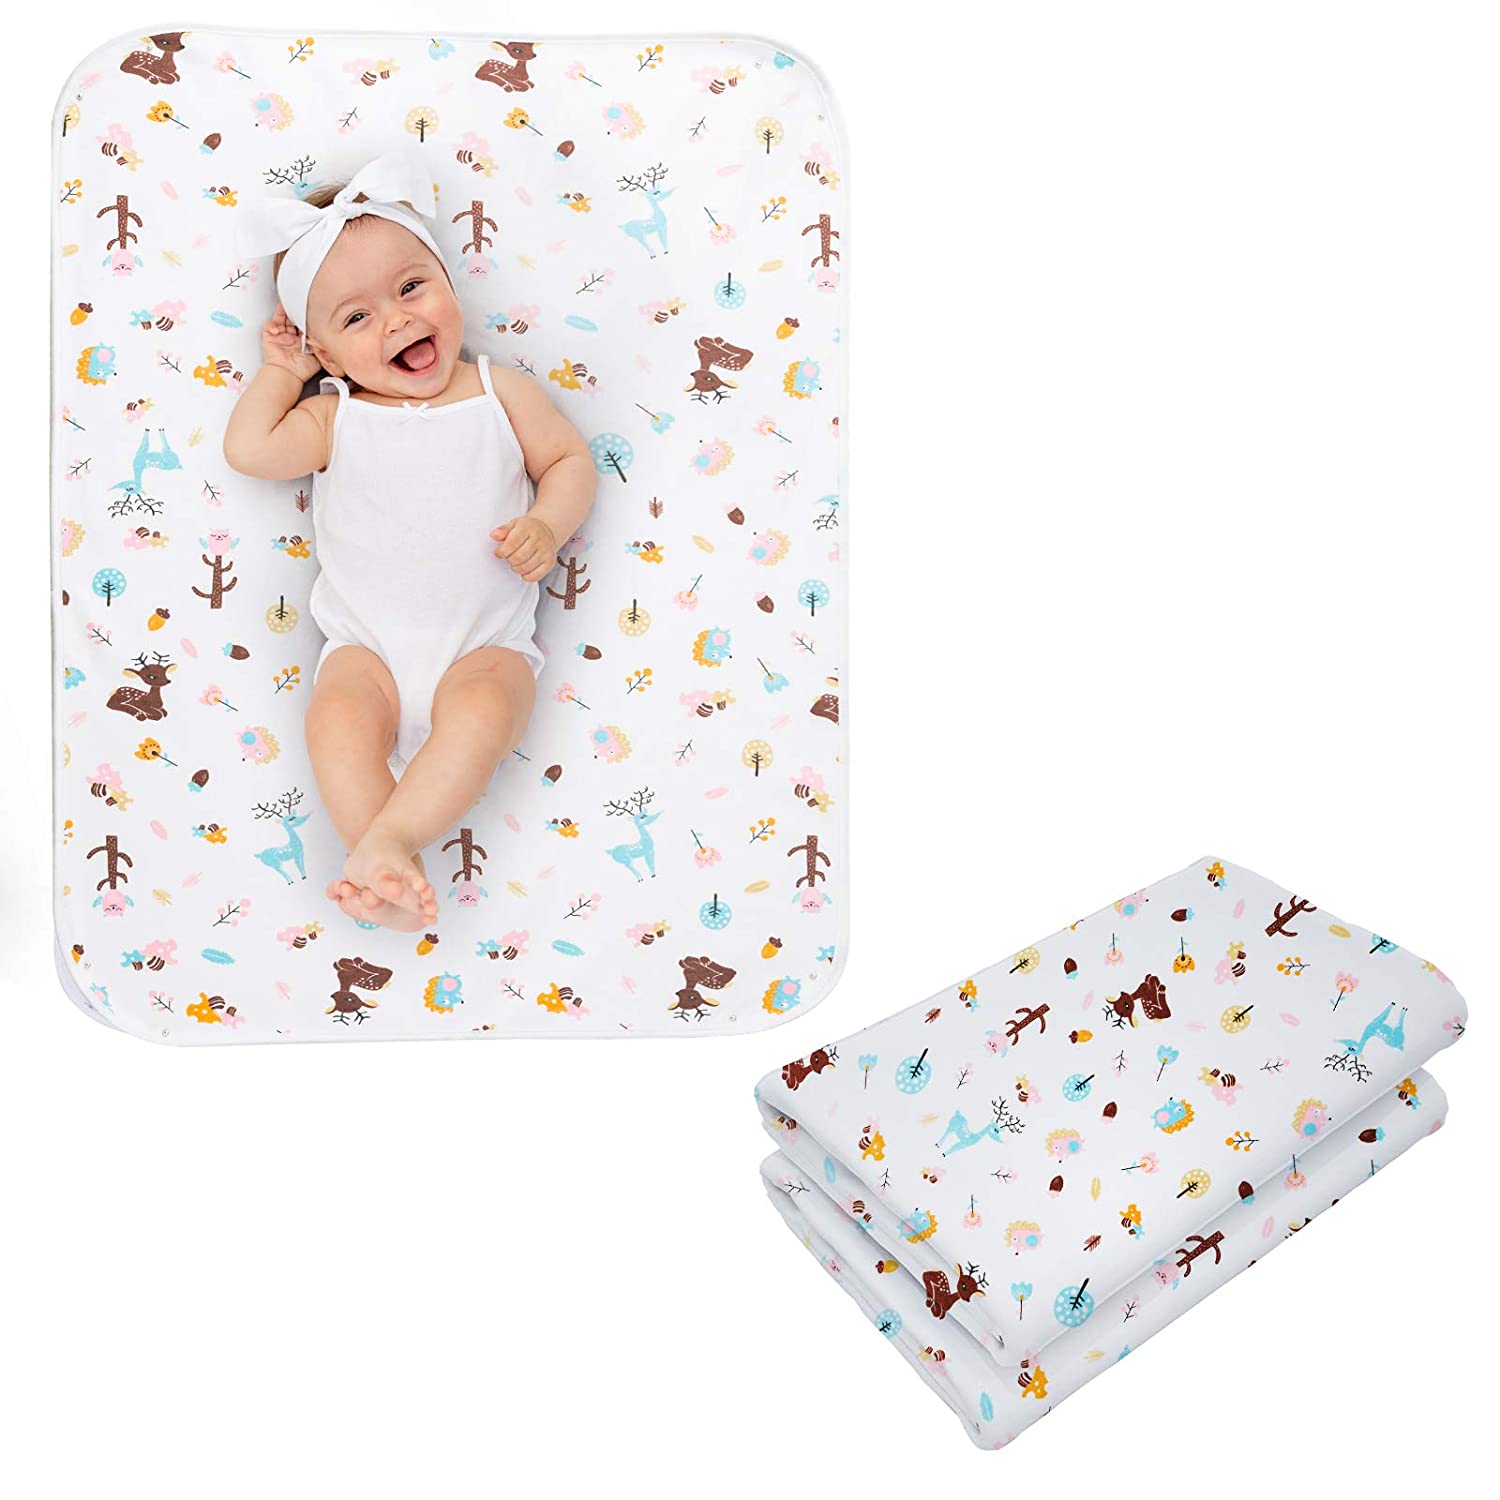 1-pack Baby Changing Pad - Suitable For Cribs, Crawling Mats, Large-sized  Newborn Children. Washable, Breathable And Waterproof Sheets Can Be Used As  Baby Changing Pads, Waterproof Pads, Pet Pads, Etc. It Is